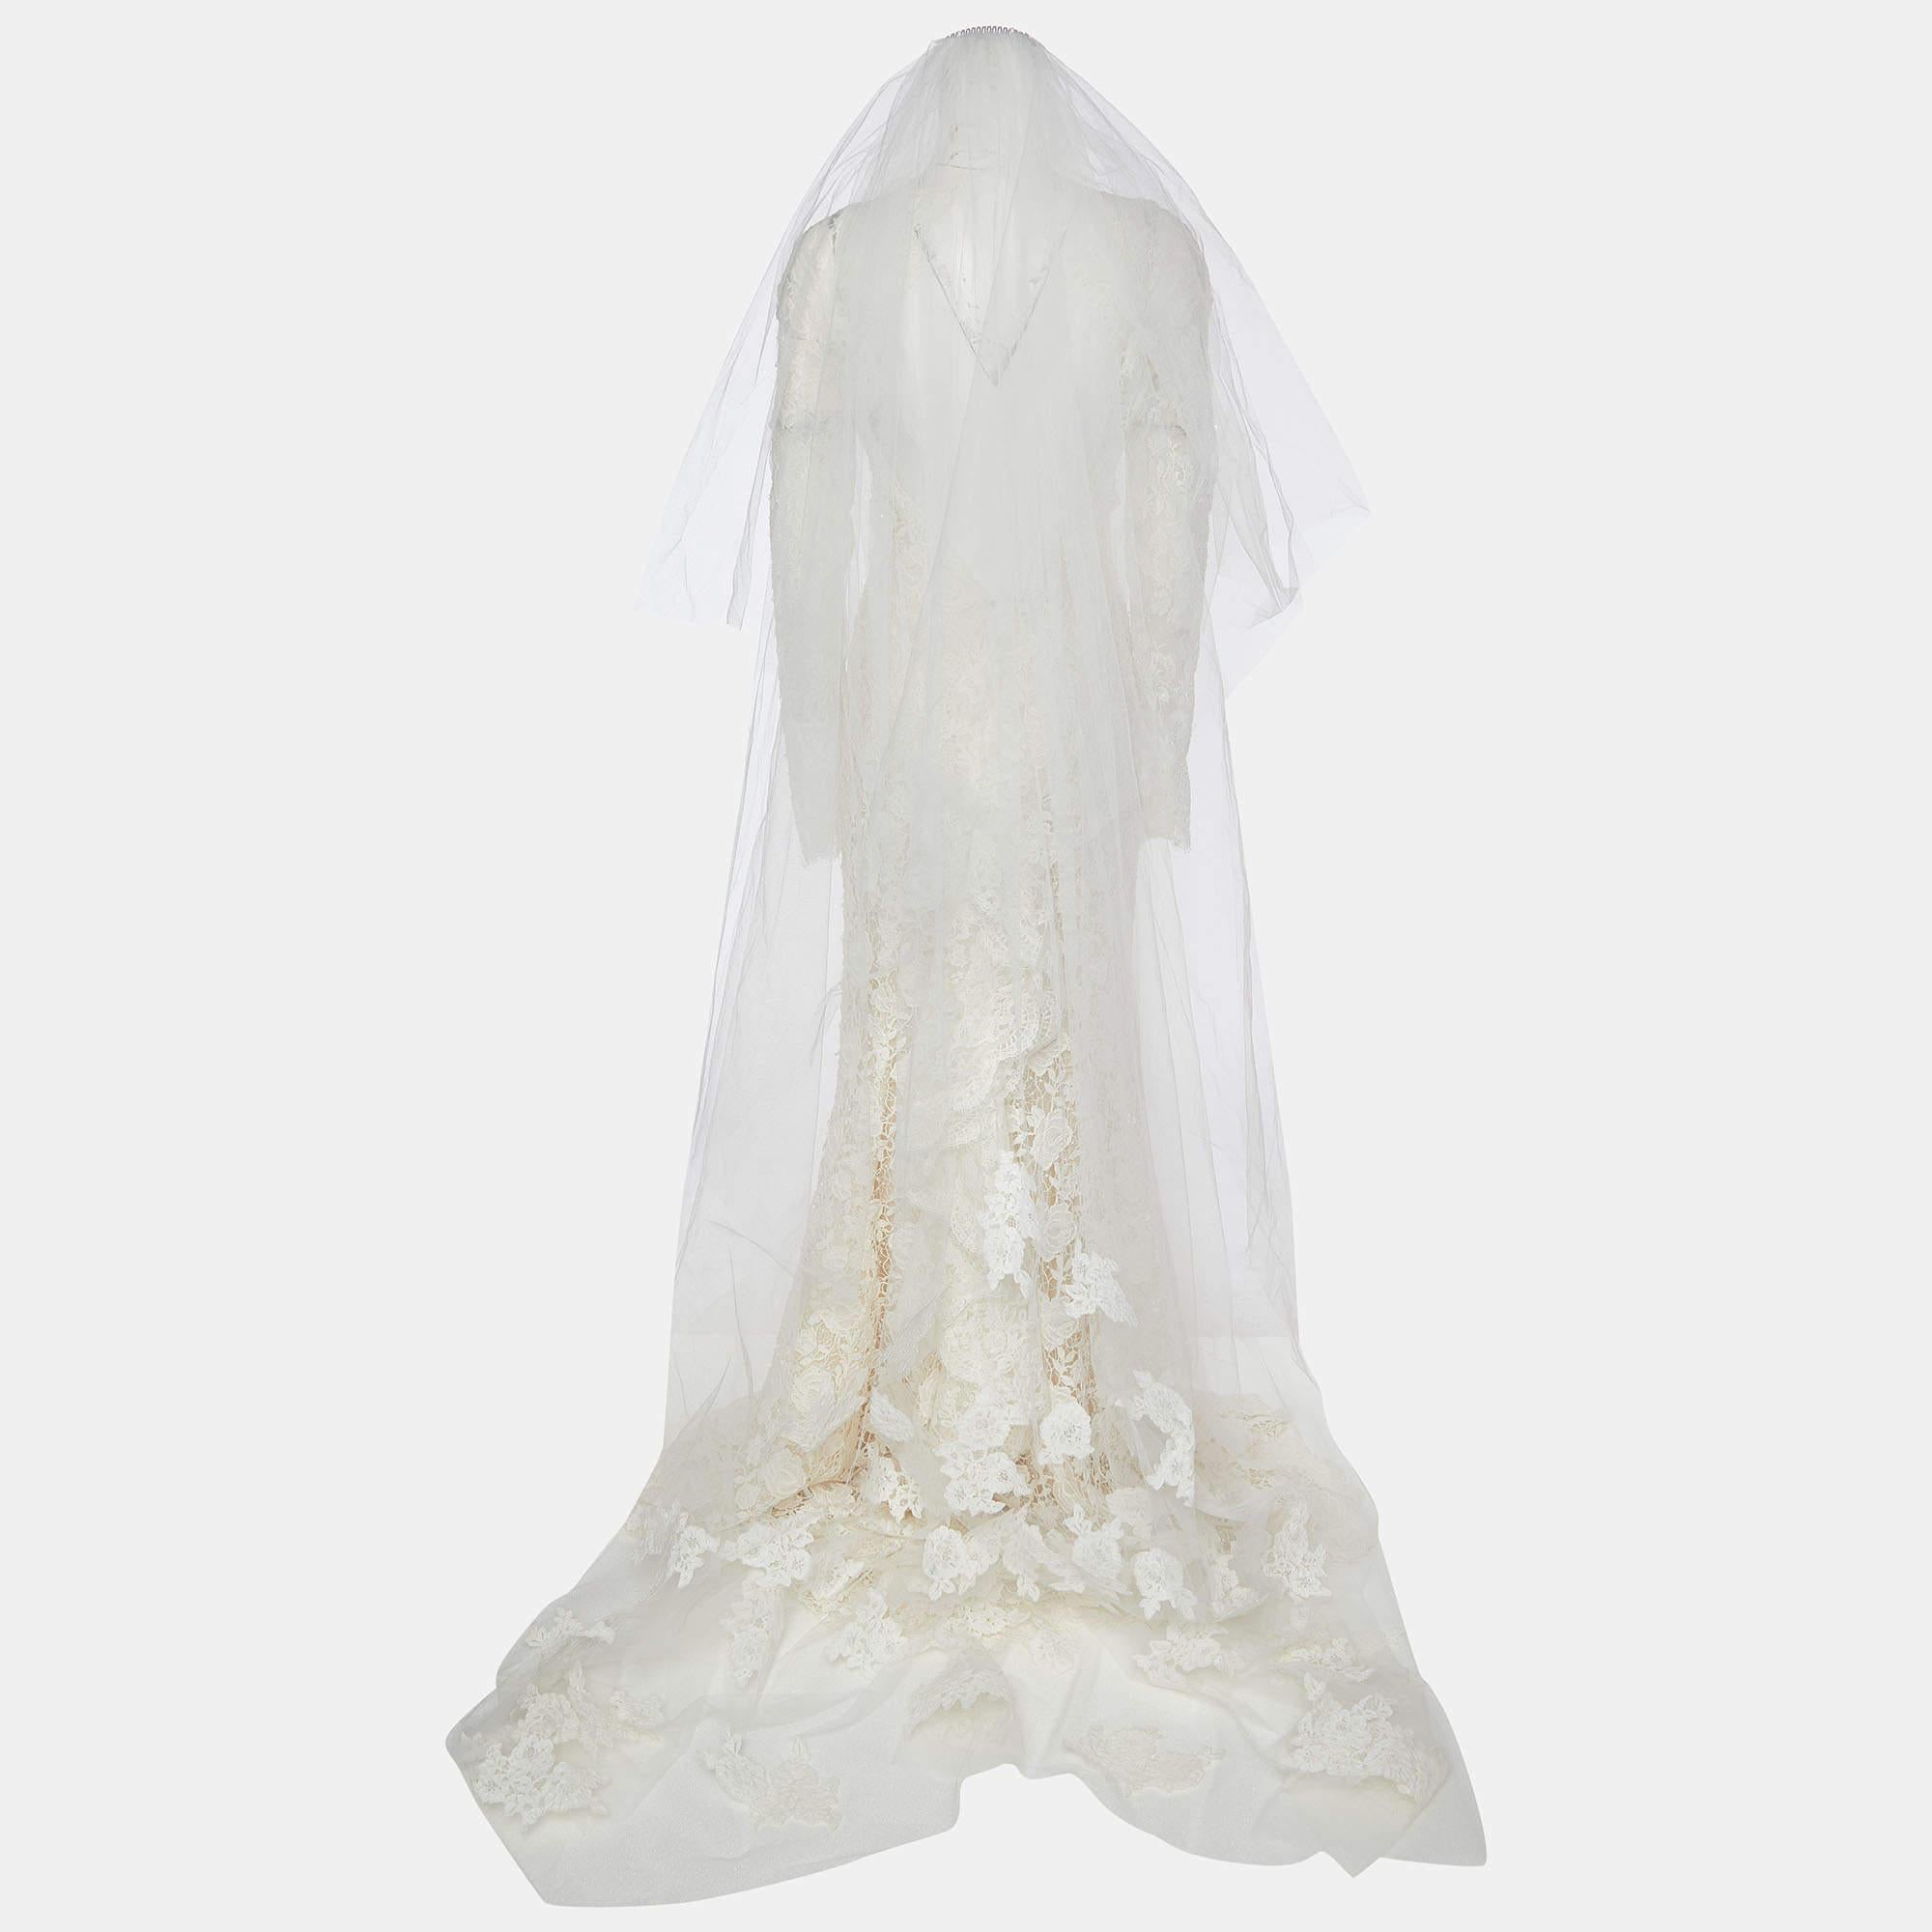 Known for its gorgeous silhouettes and fine tailoring, Oscar de la Renta is back with another appealing design to elevate your style. This dress is made from off-white floral lace and displays a sleeveless style and a fluted hemline. It is provided